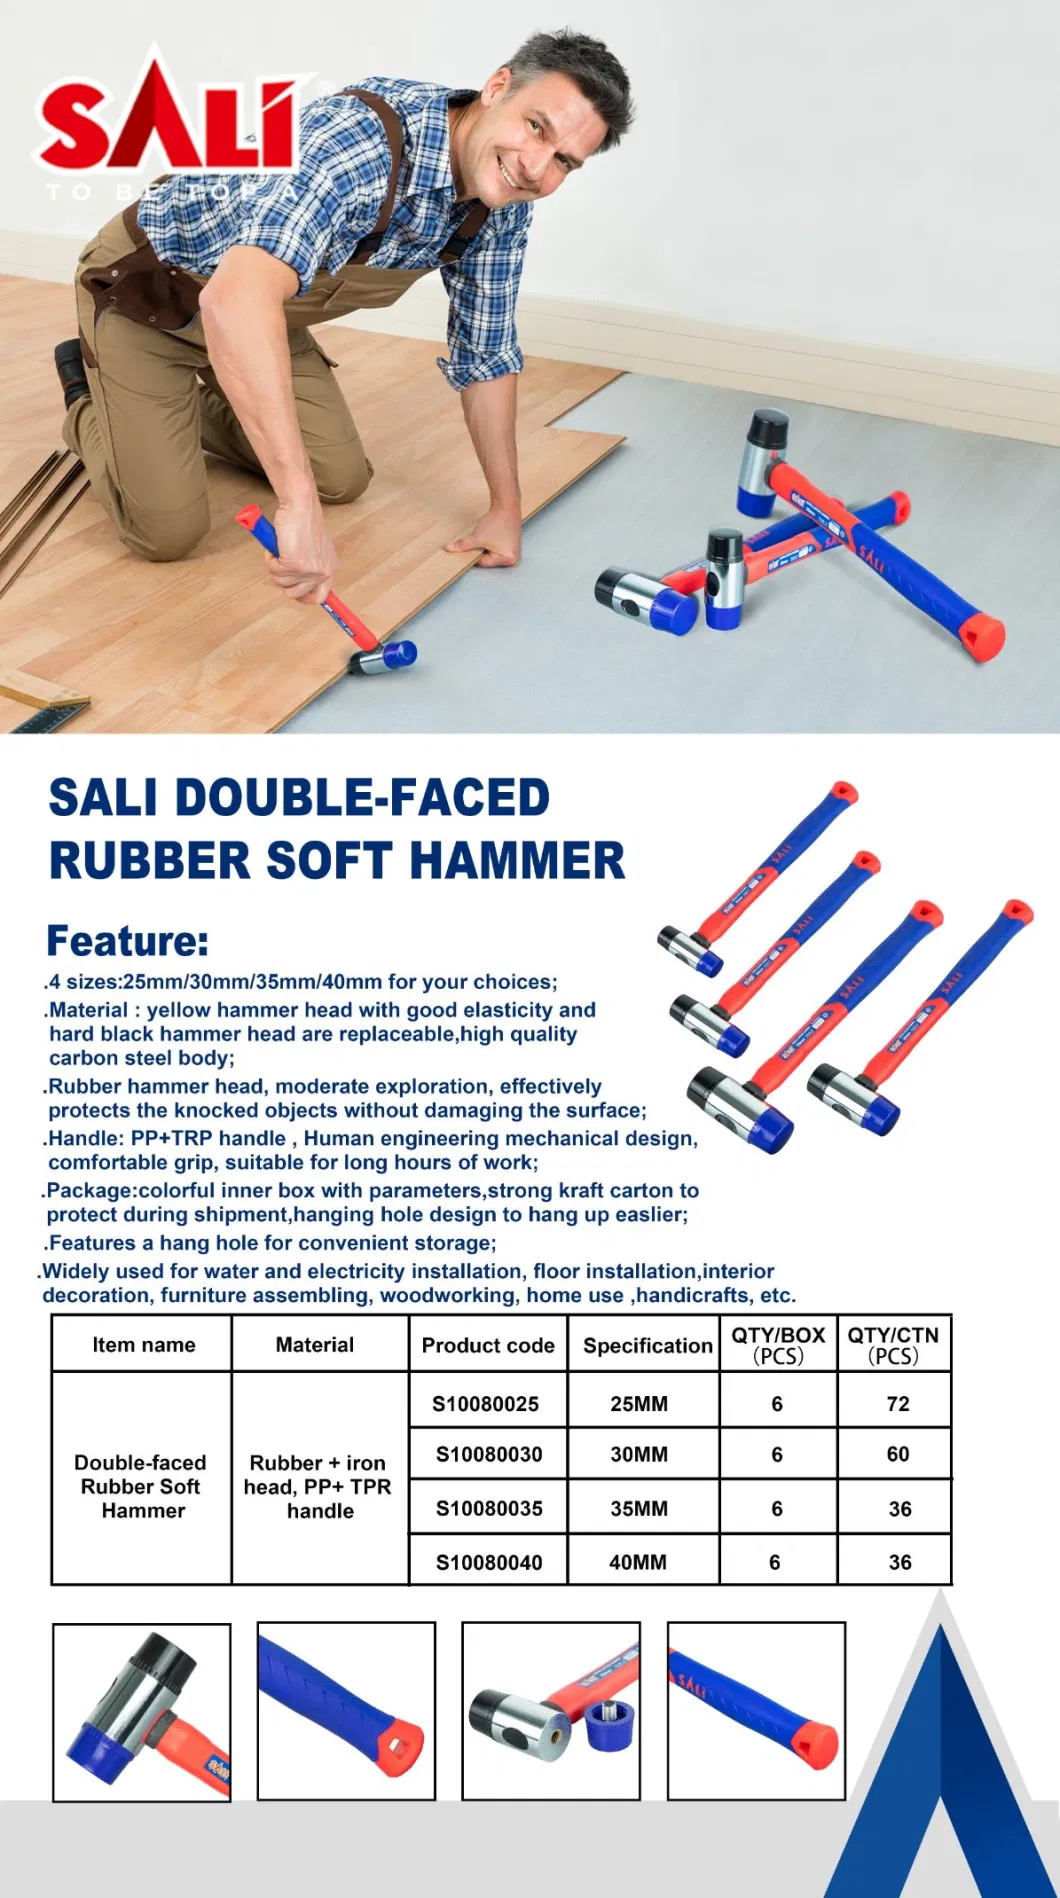 Sali S10080030 30mm Iron Head Double-Faced Rubber Soft Hammer